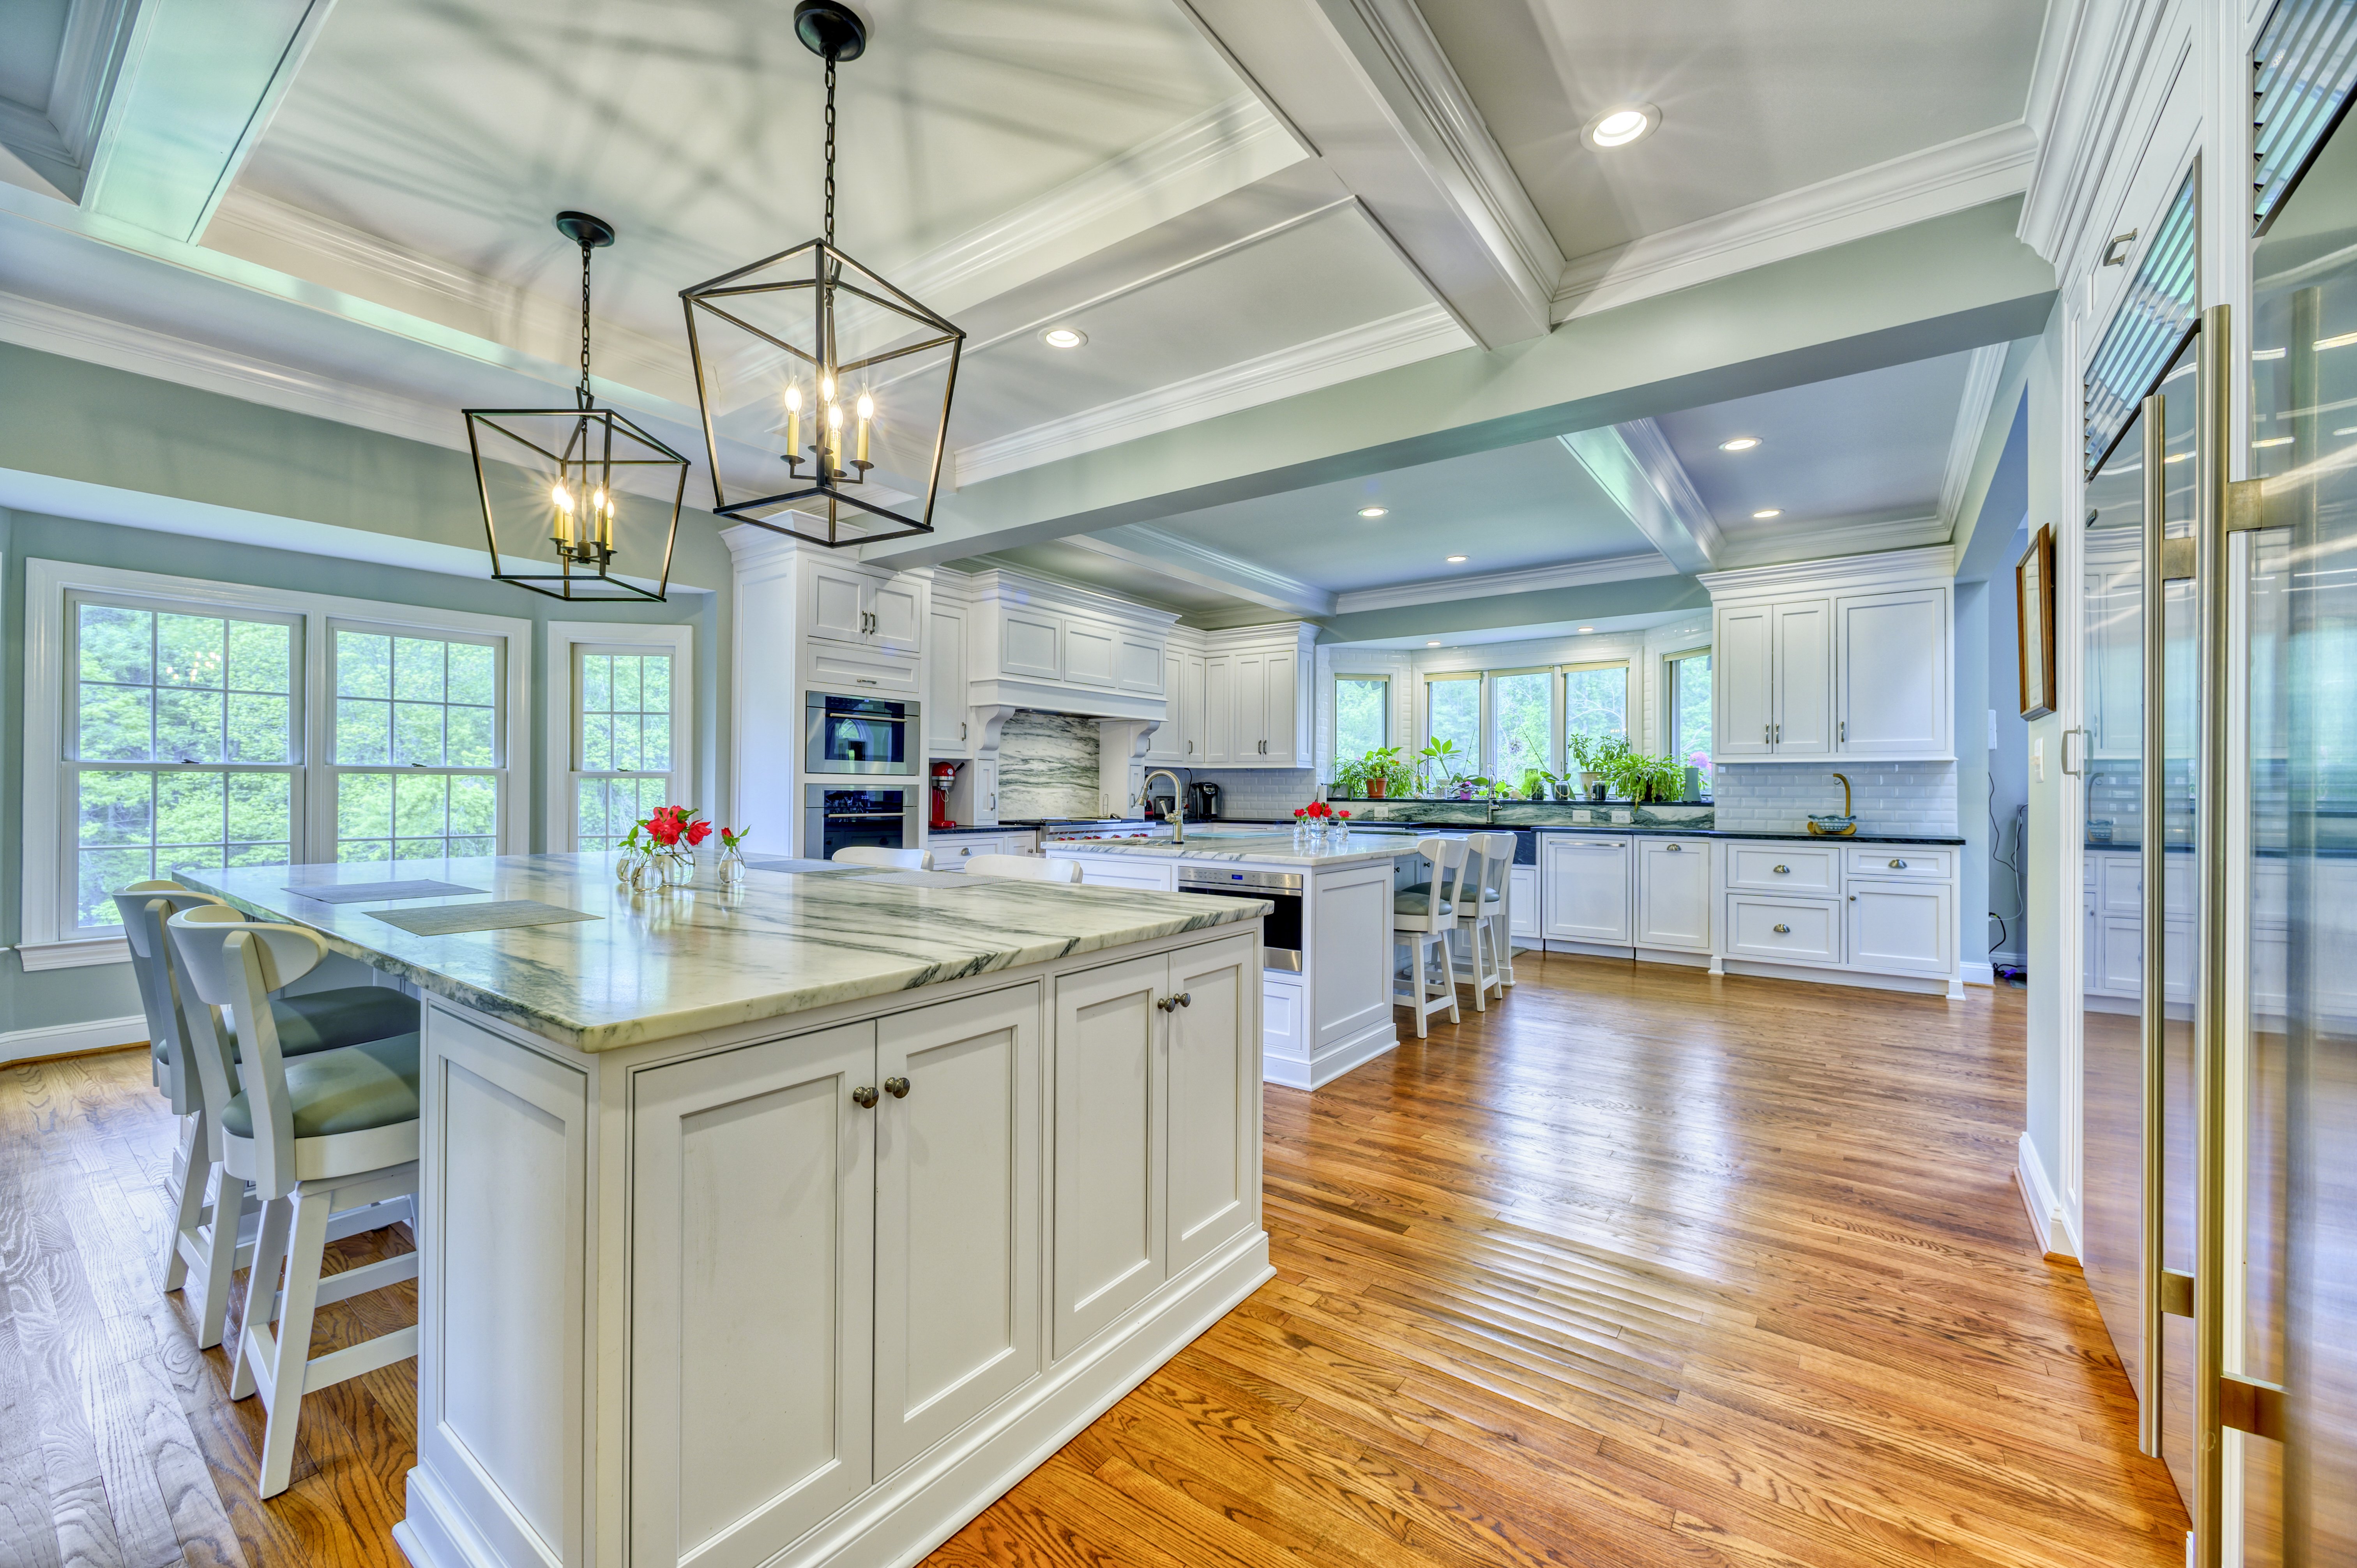 Coffered Ceiling in spacious kitchen with hard wood floors